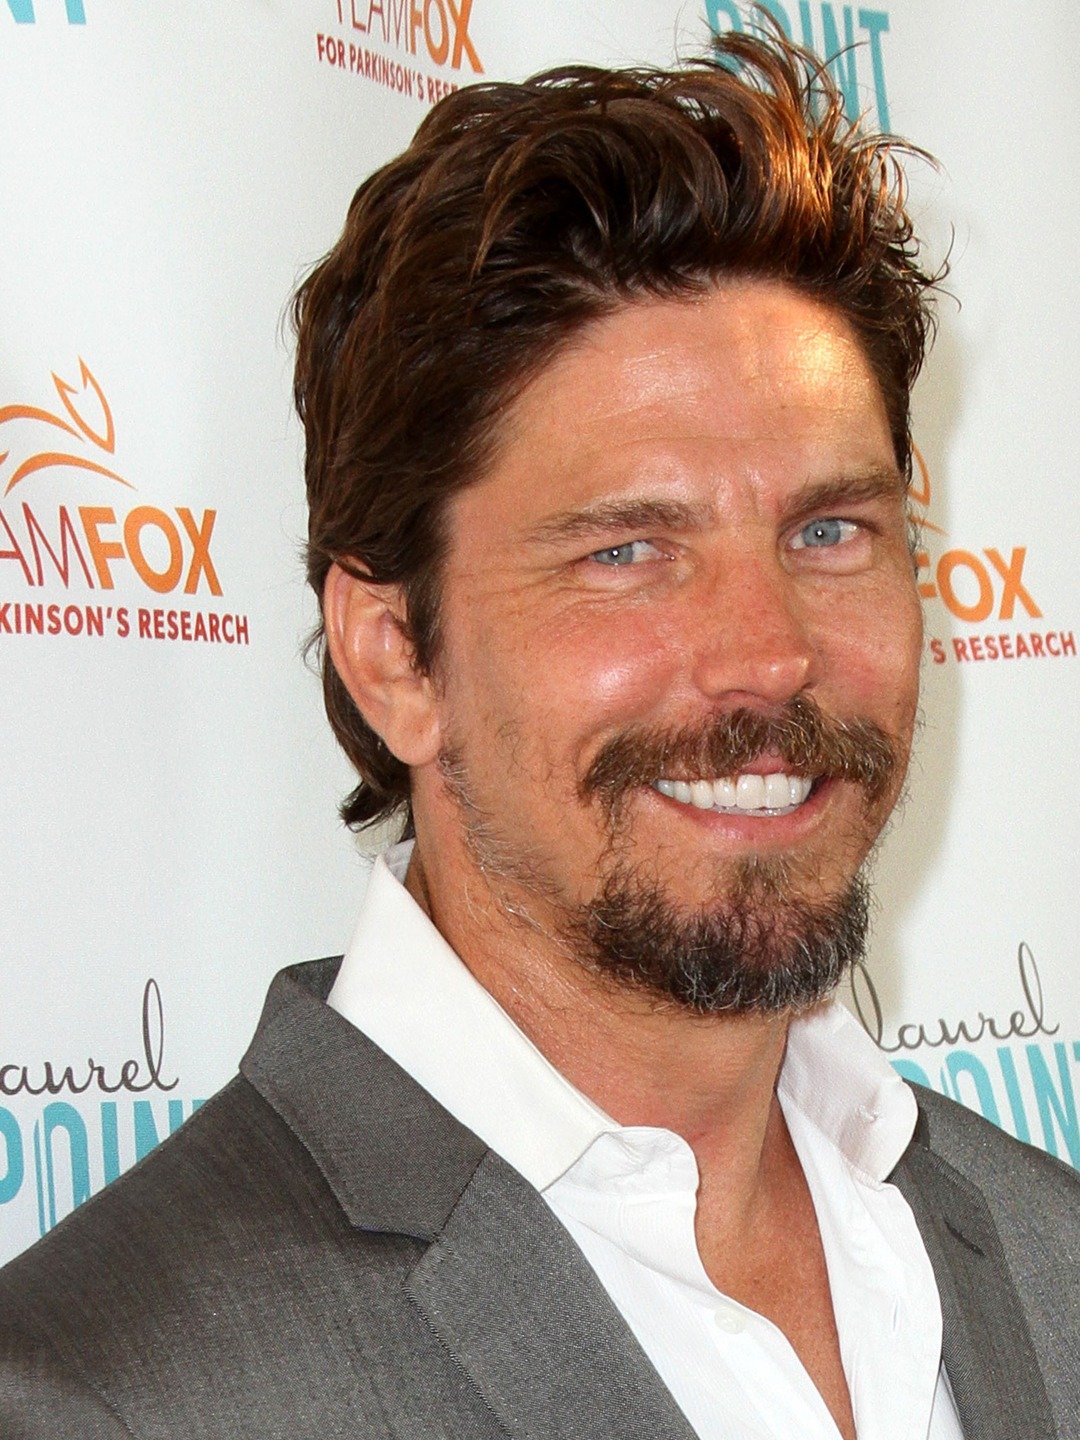 How tall is Michael Trucco?